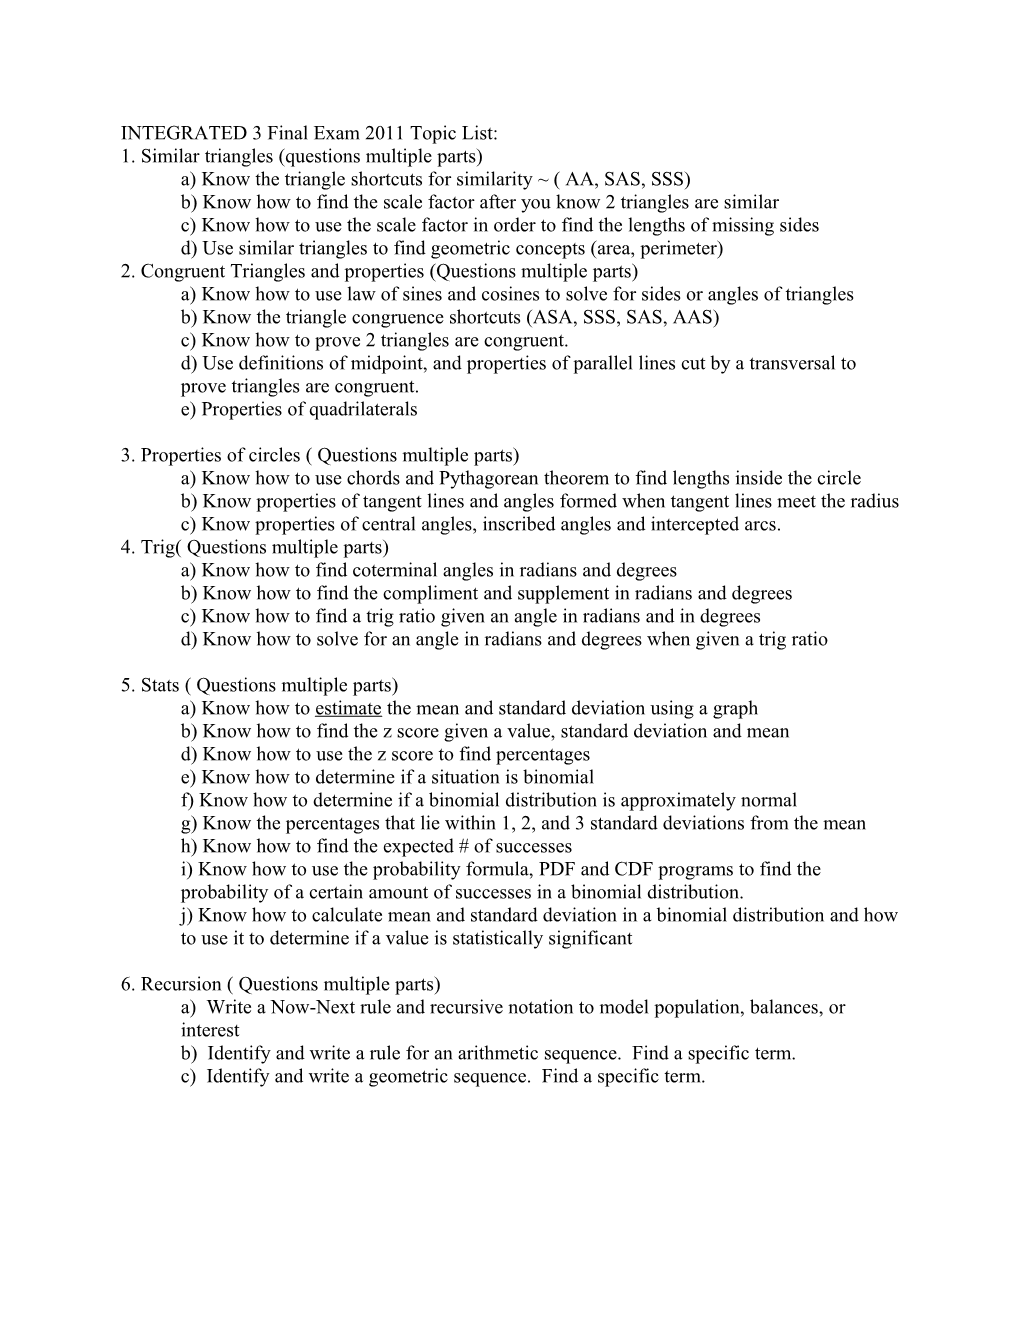 INTEGRATED 3 Final Exam 2011 Topic List